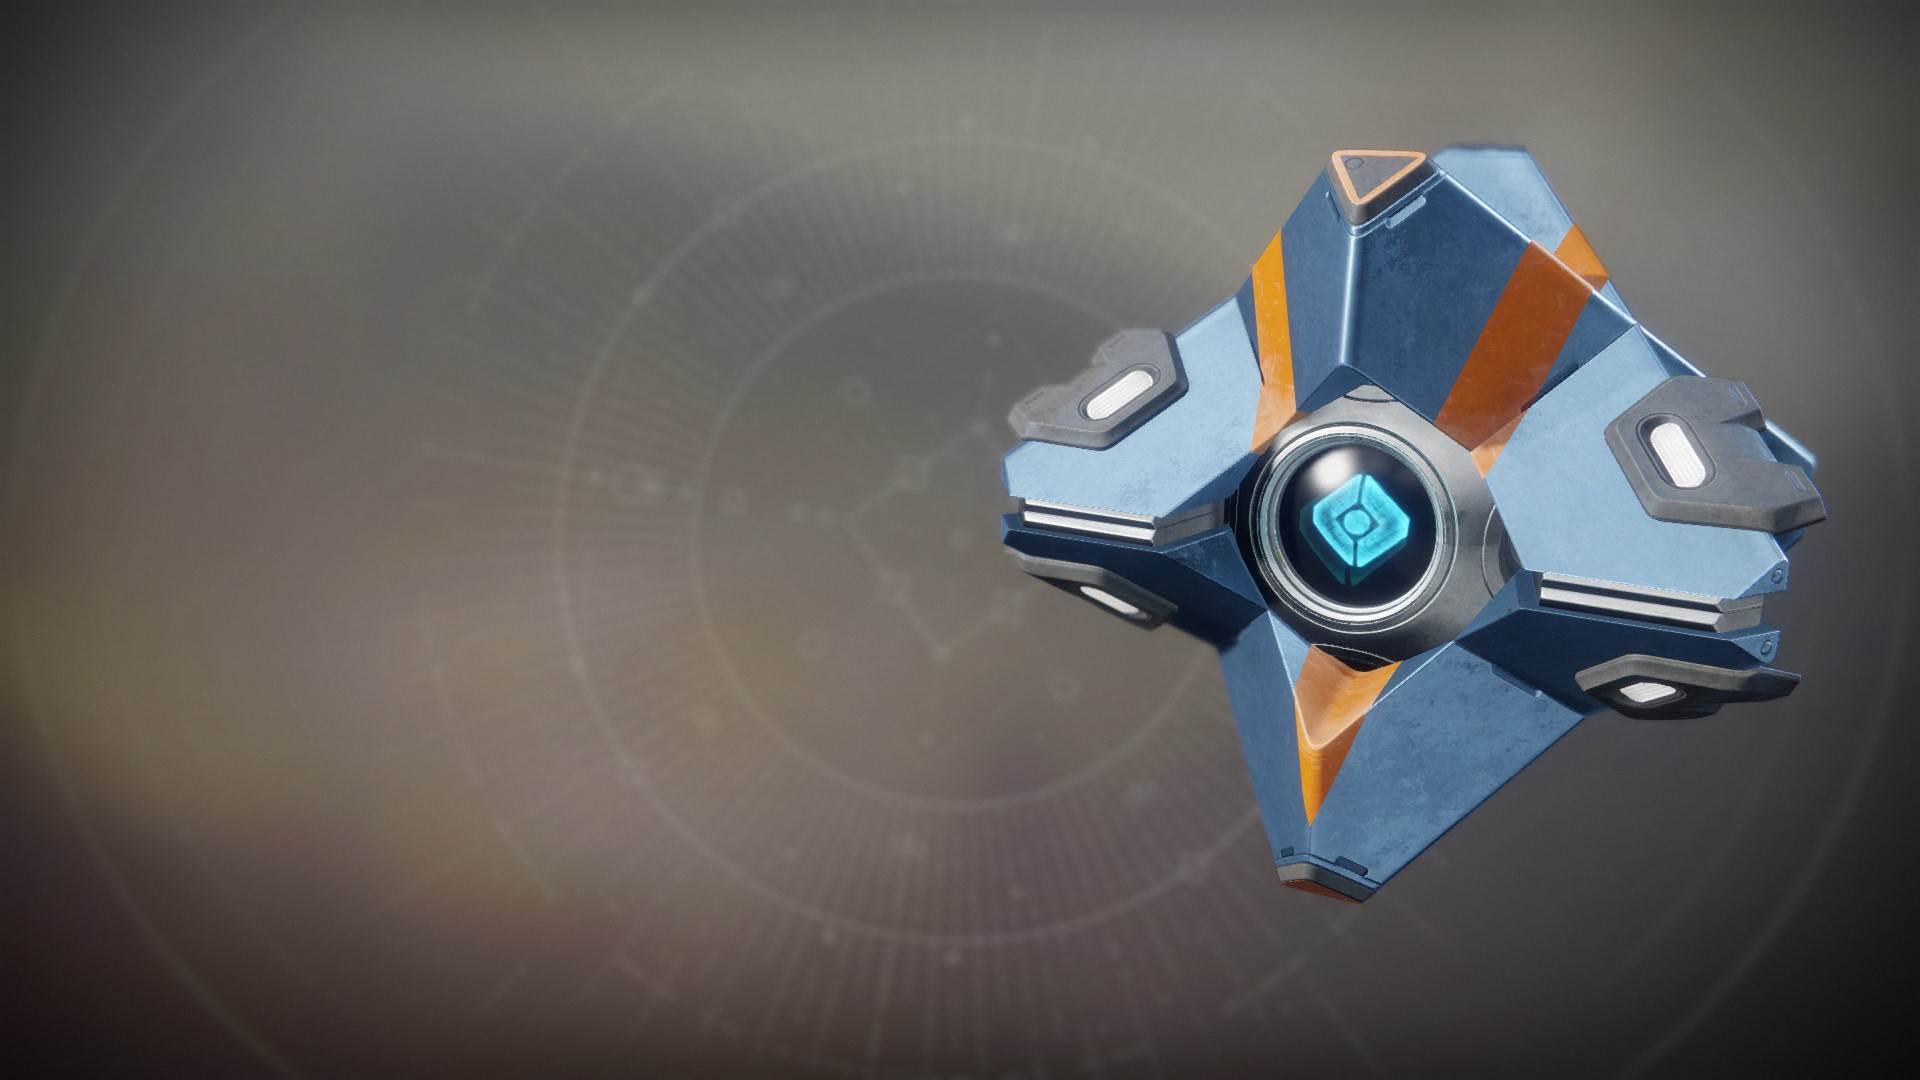 An in-game render of the Kingfisher Shell.